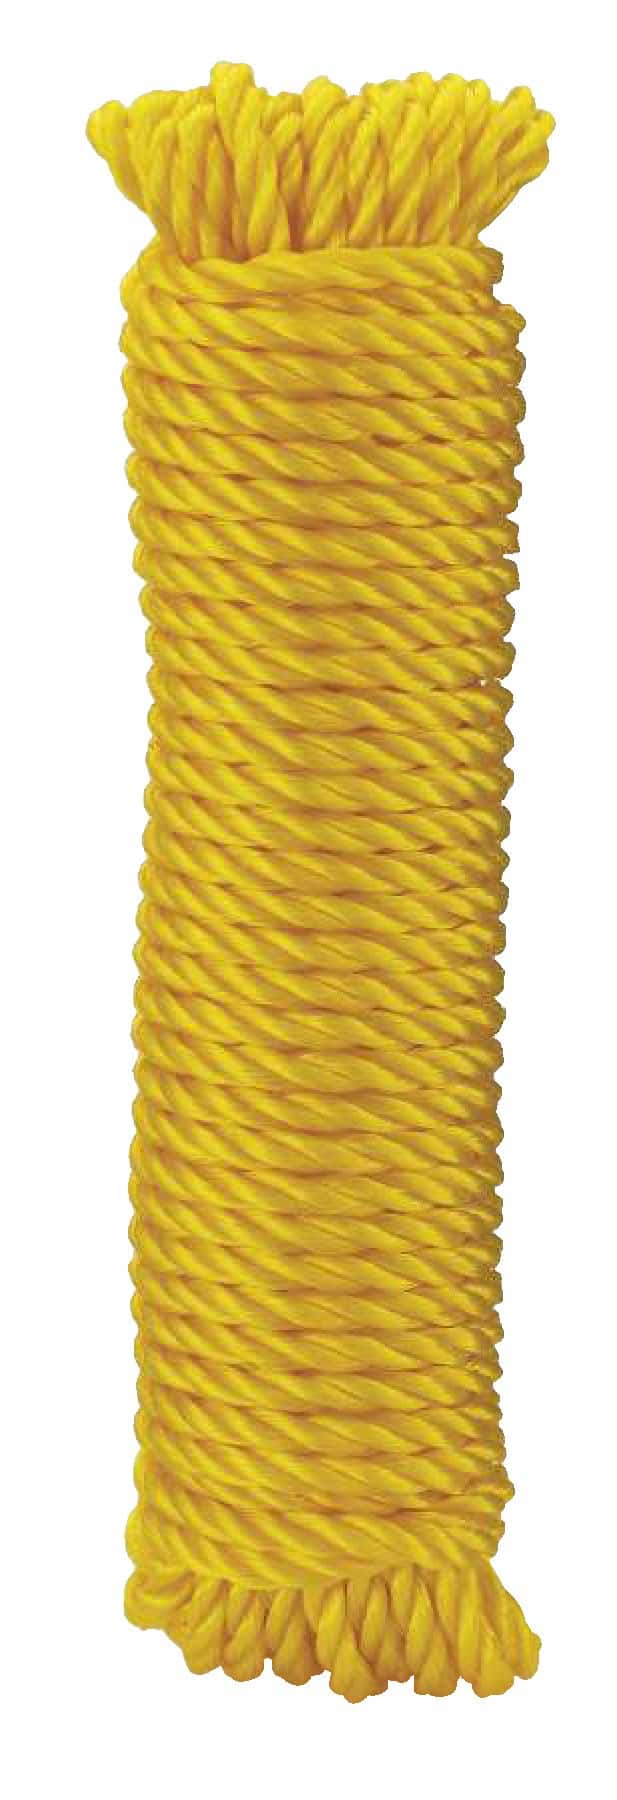 https://media-www.canadiantire.ca/product/fixing/hardware/general-hardware/0618522/rope-poly-twist-14-x-50--44b7c56a-372a-416b-8ae3-e8a593f10505-jpgrendition.jpg